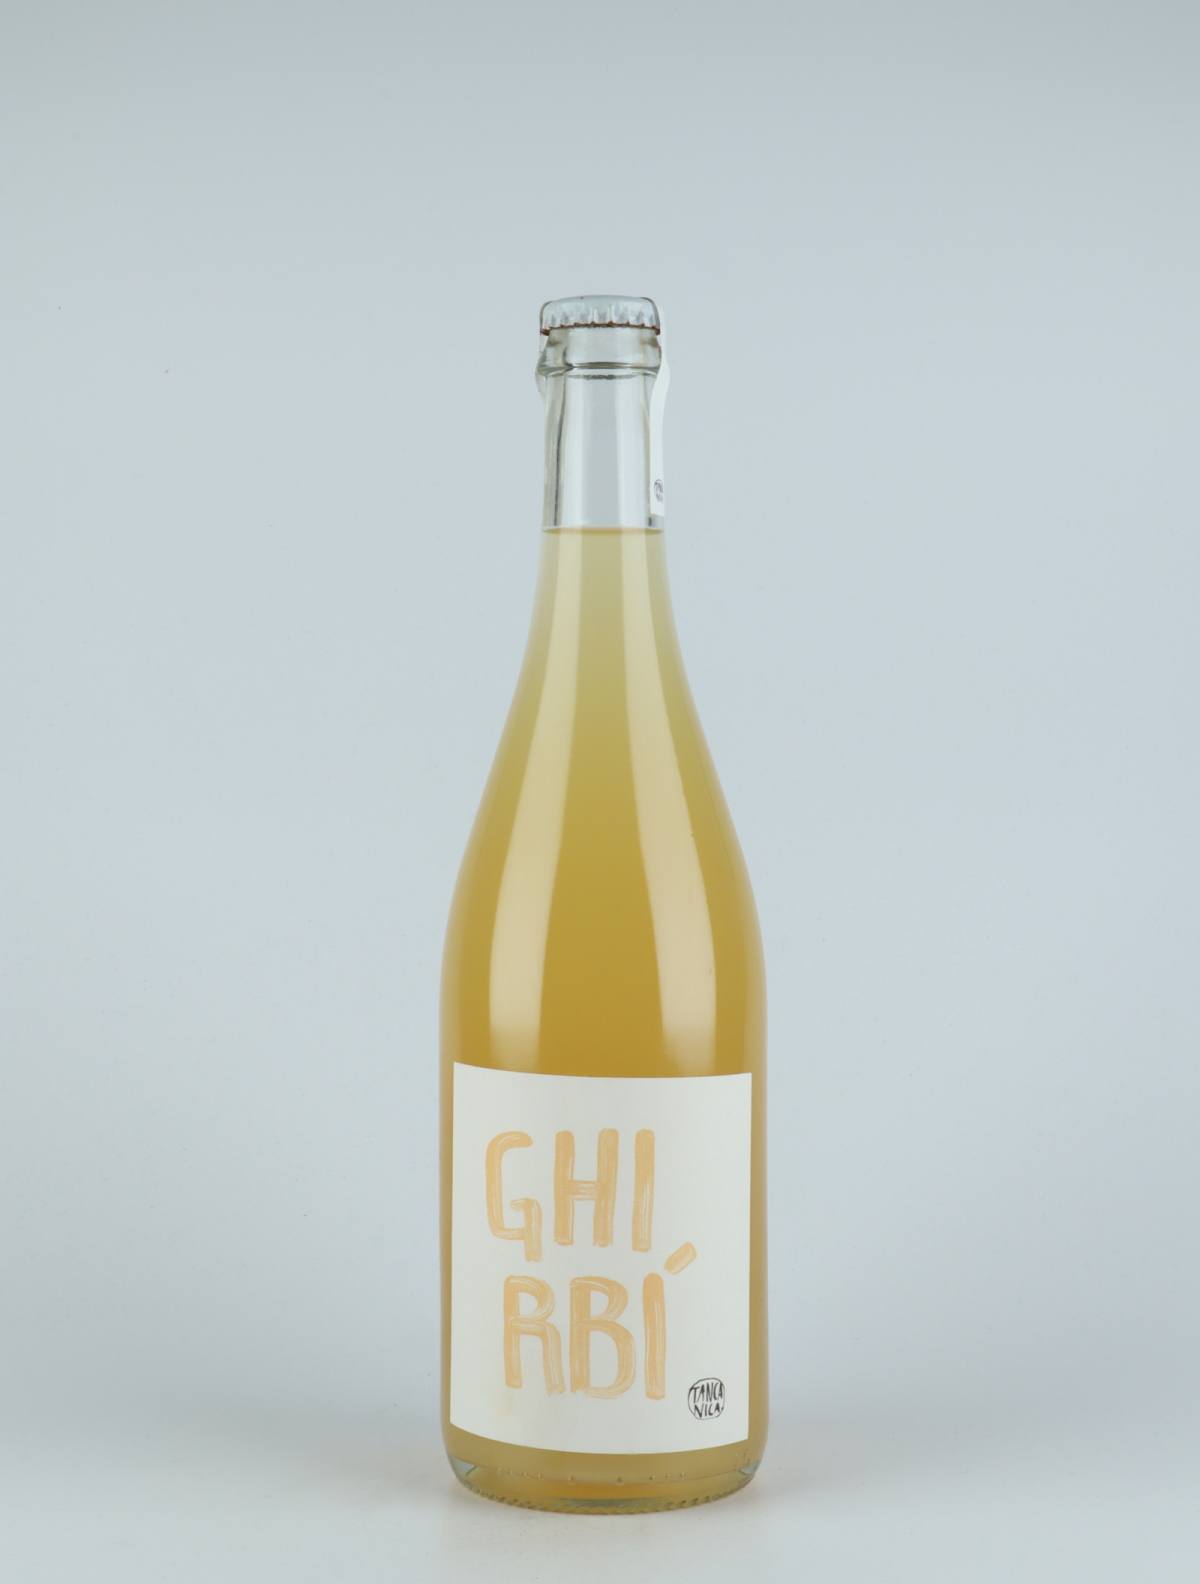 A bottle 2018 Ghirbi Sparkling from Tanca Nica, Sicily in Italy